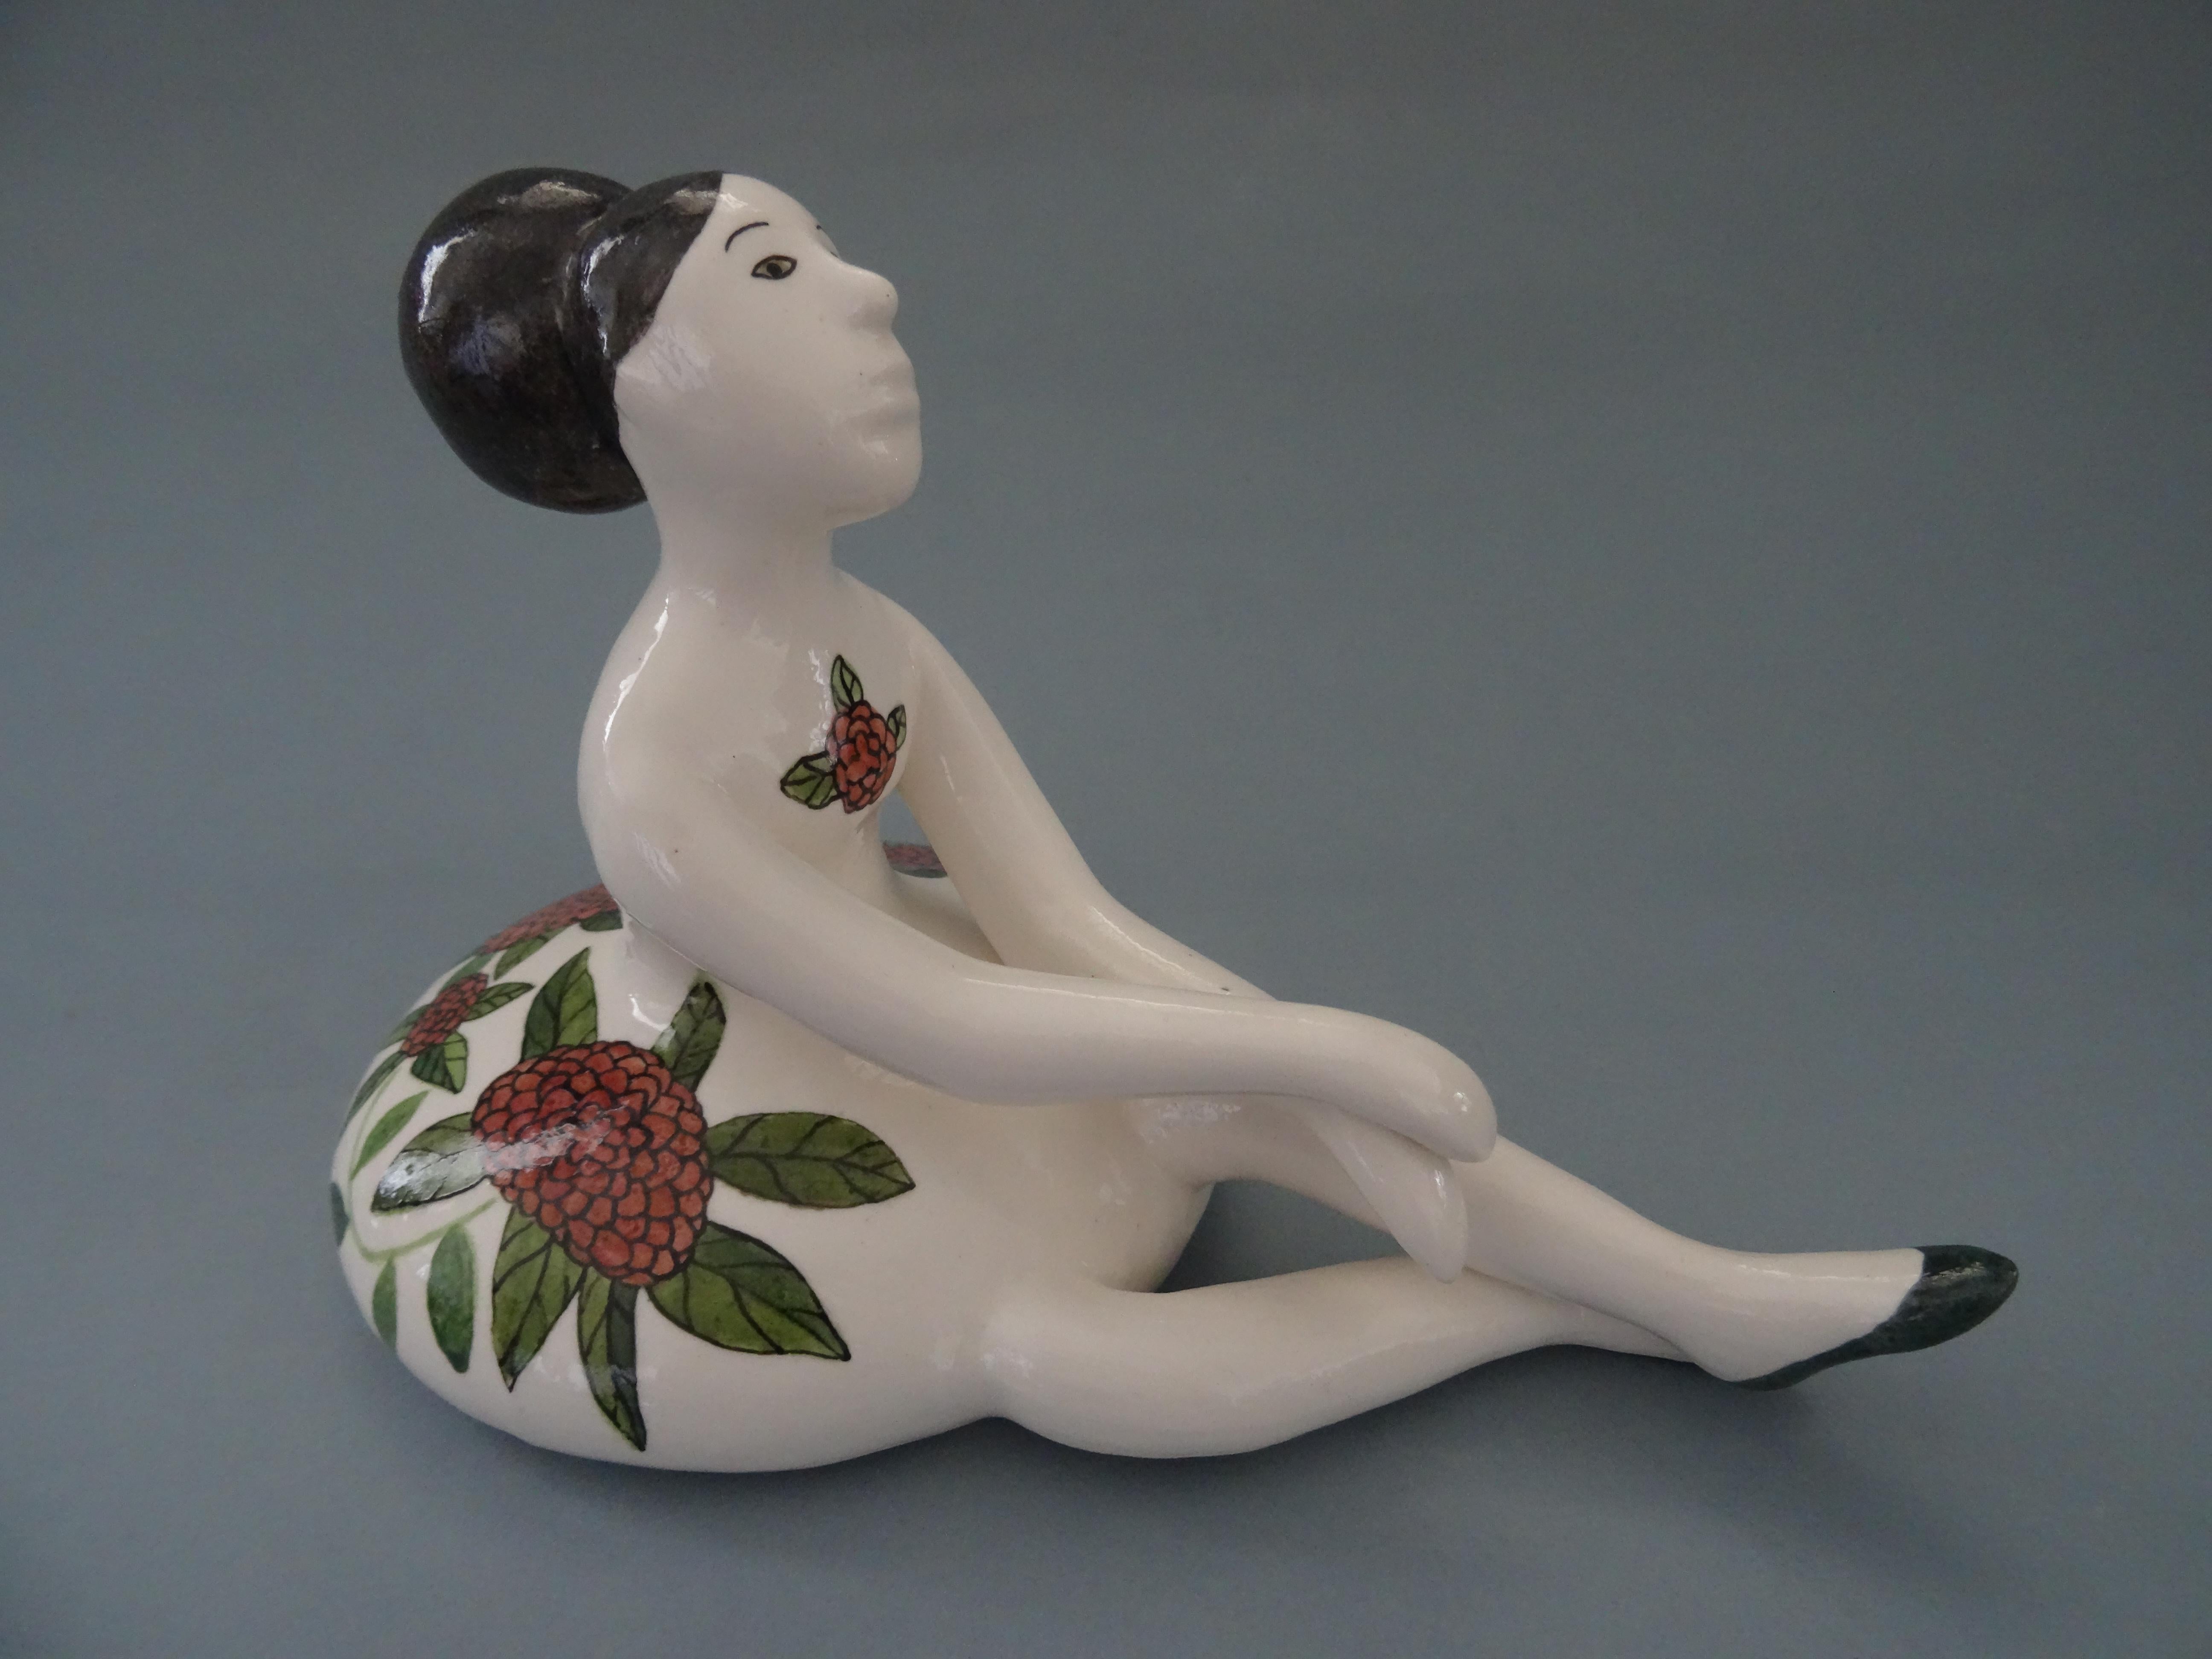 Ballerina  2015. Porcelain, 12x19 cm - Sculpture by Inese Margevica 